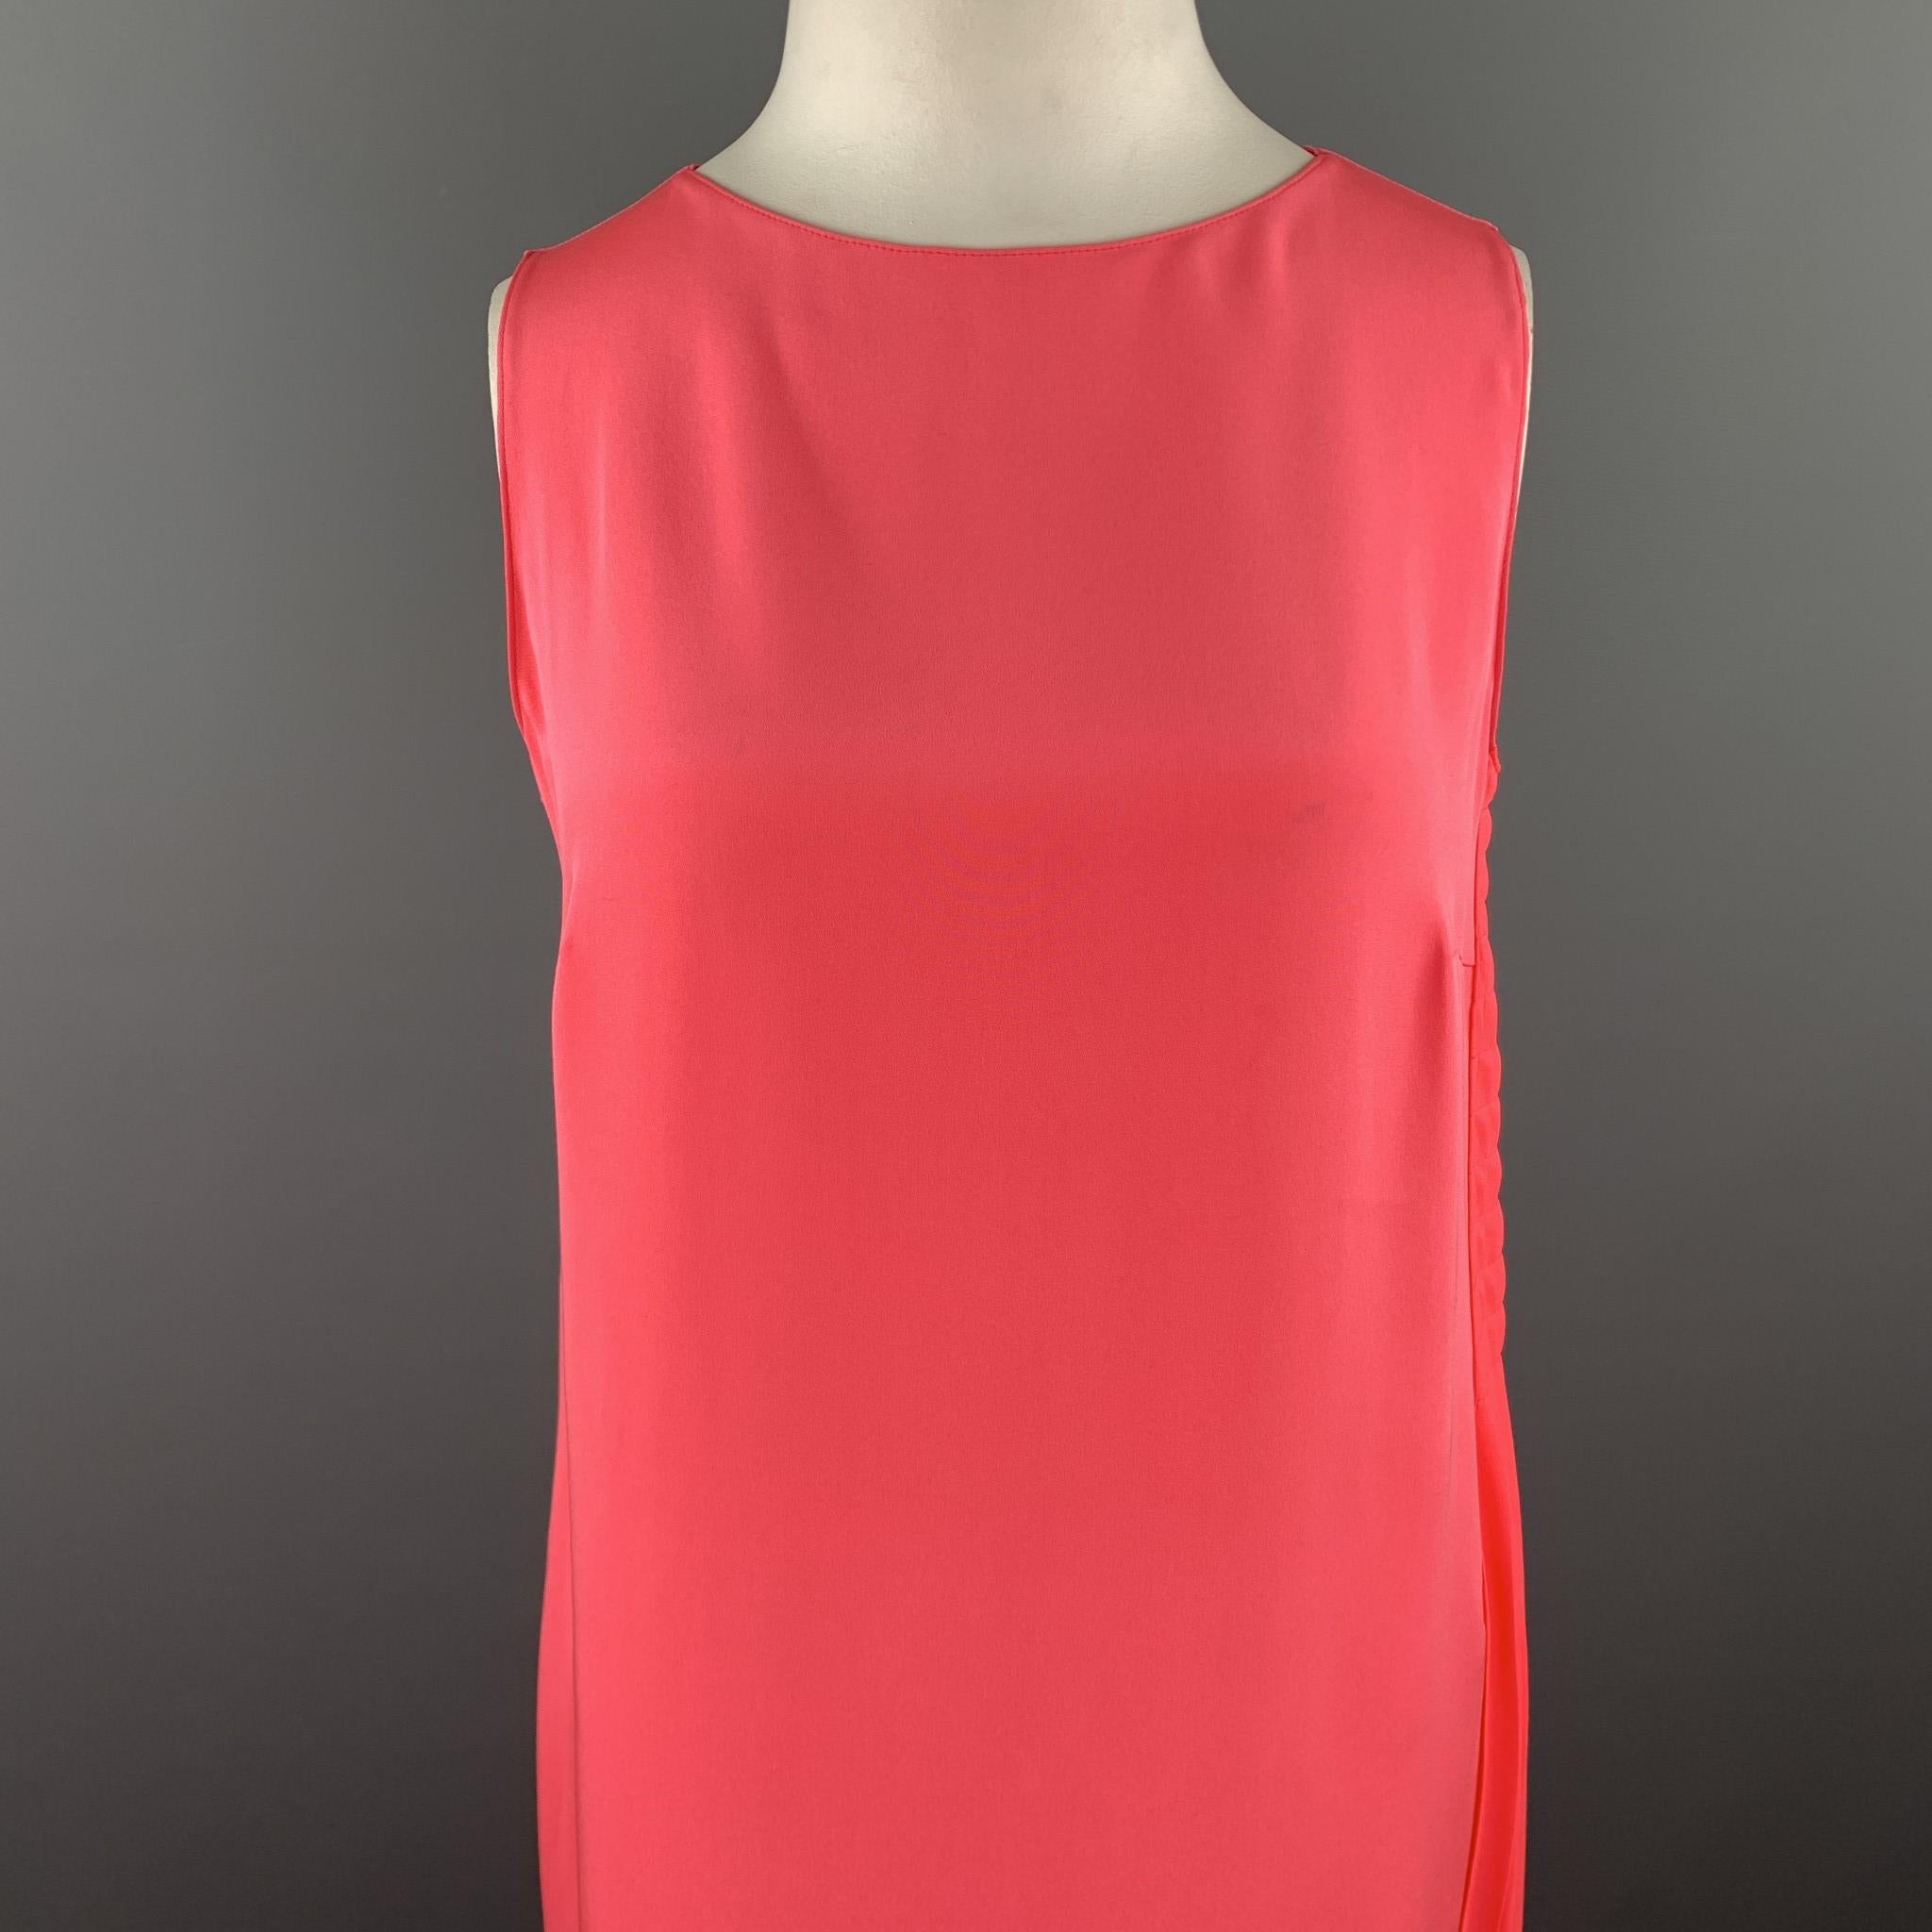 Sleeveless AKRIS shift dress comes in bold pink silk crepe chiffon with a round neckline and asymmetrical pleated side sash detail. 

Excellent Pre-Owned Condition.
Marked: US 12

Measurements:

Shoulder: 14 in.
Bust: 42 in.
Waist: 42 in.
Hip: 42